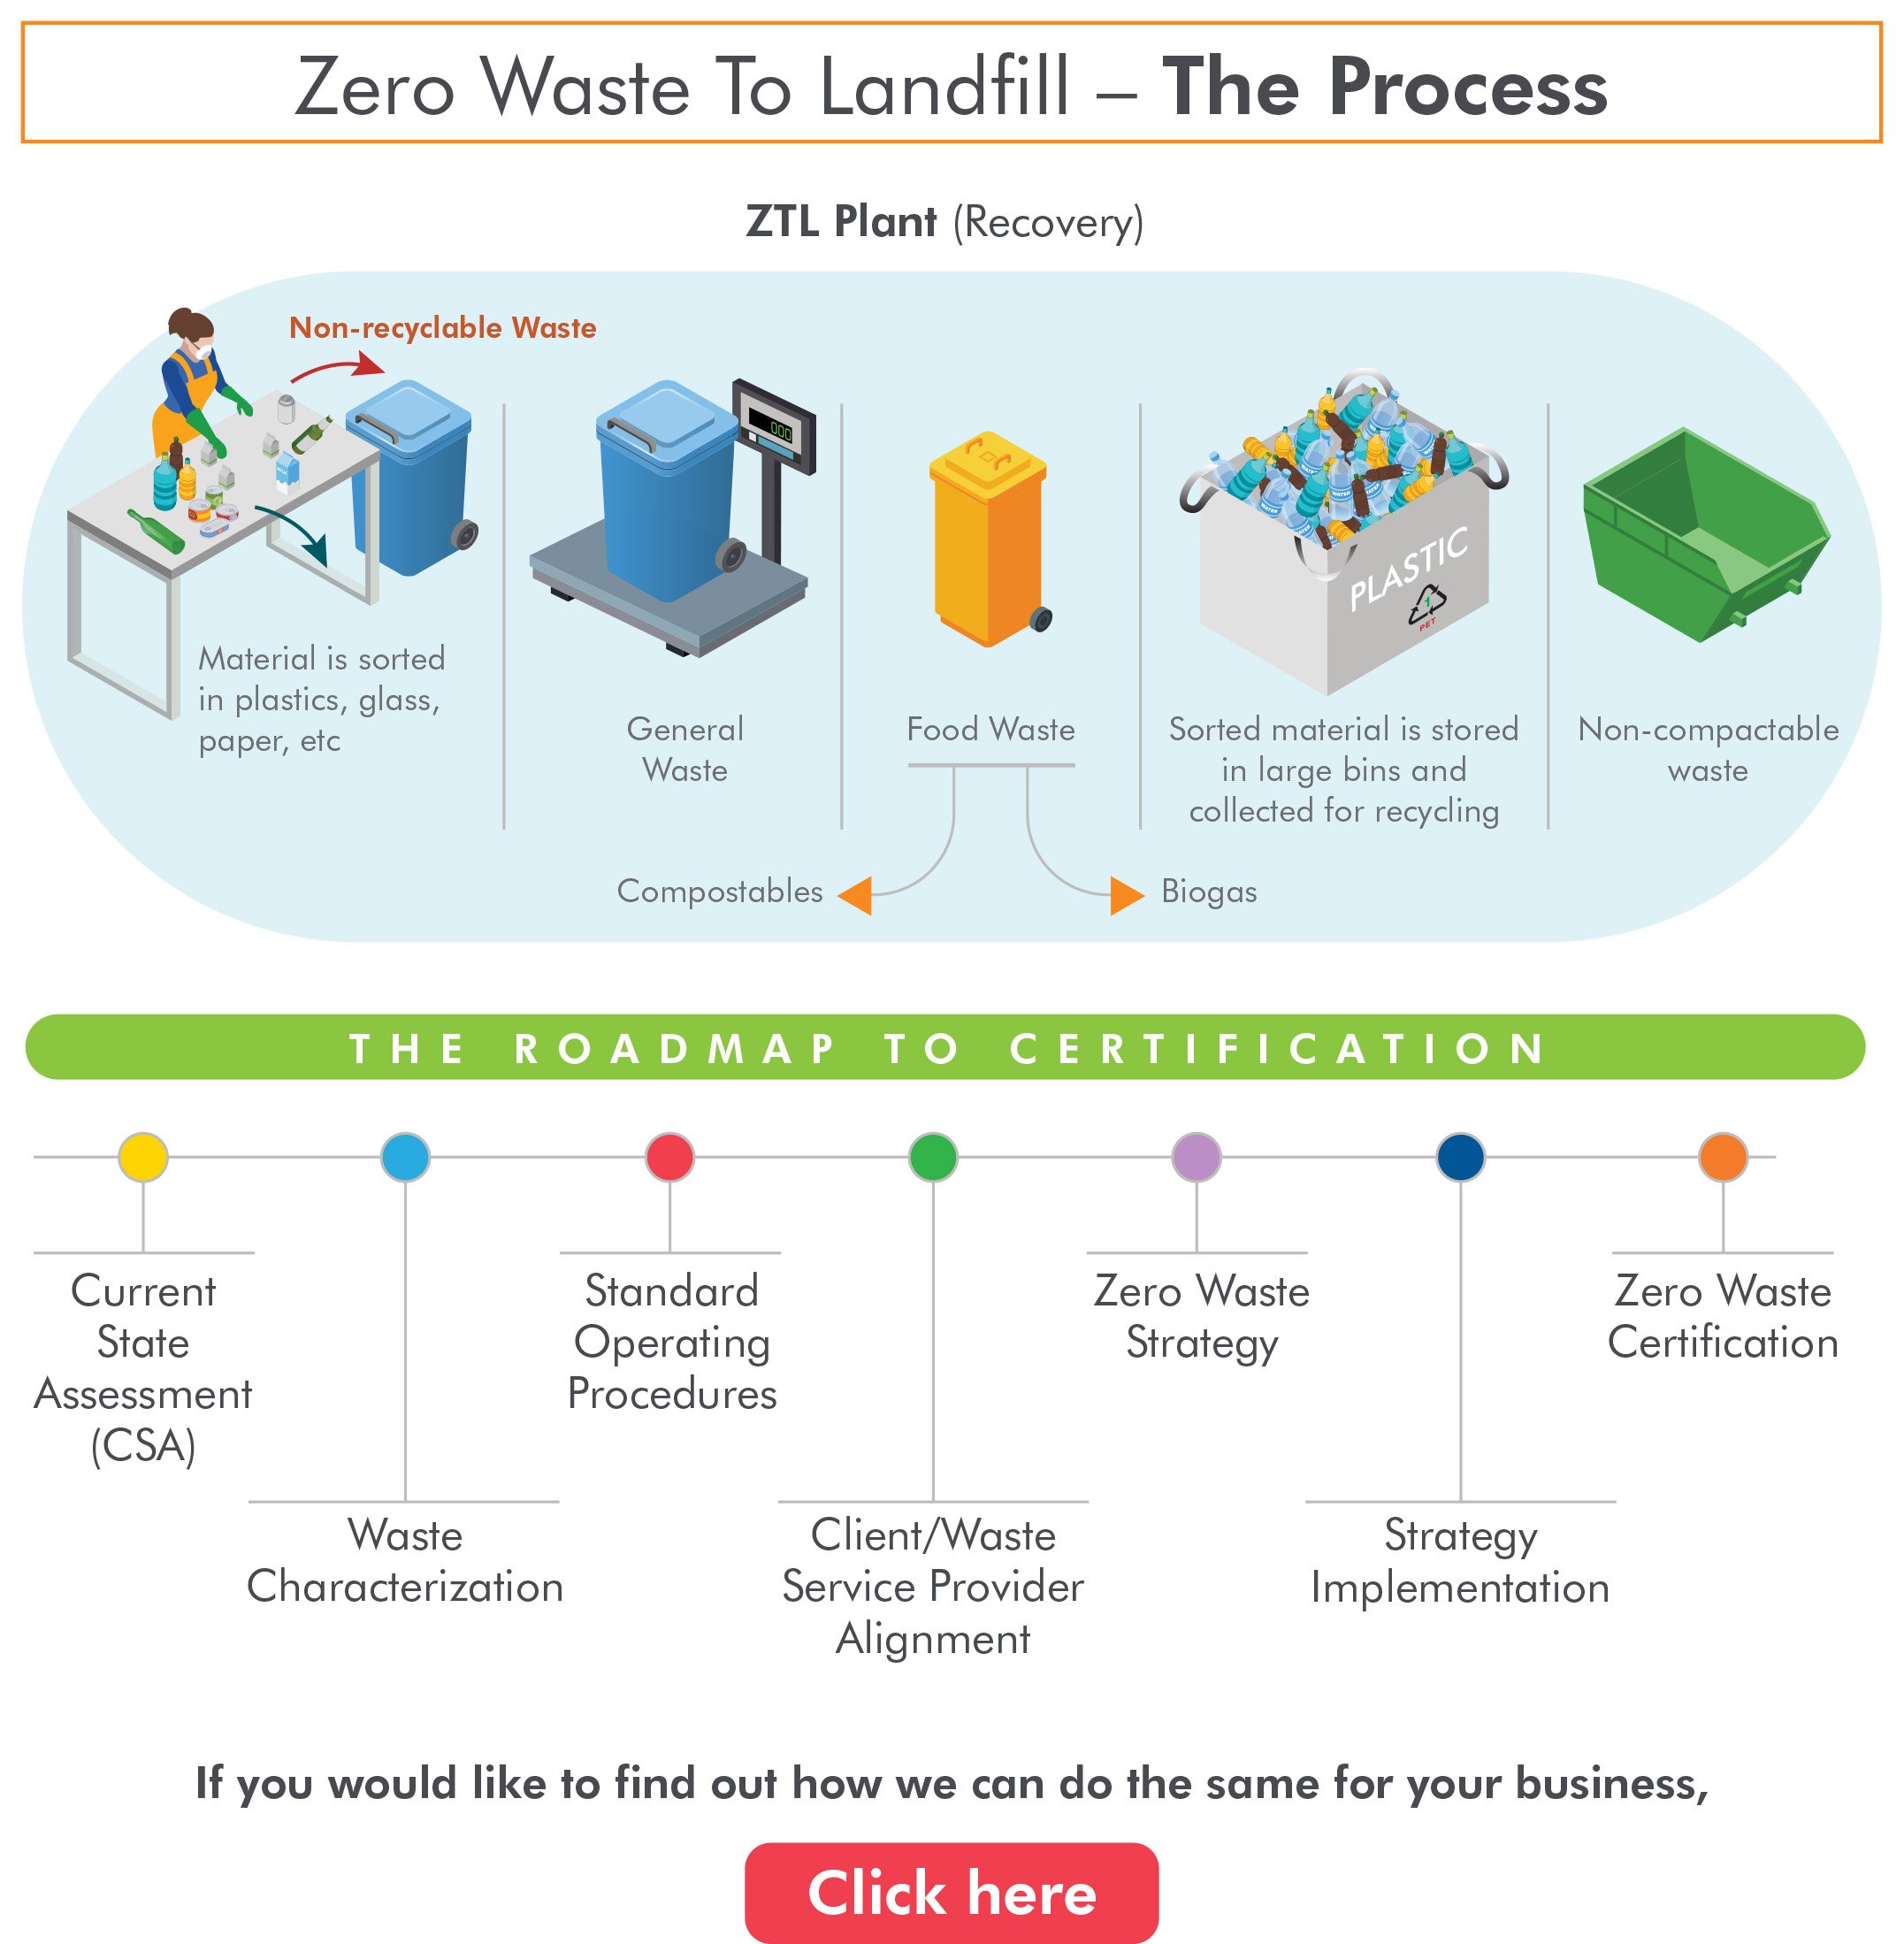 The Realization of Zero Waste to Landfill